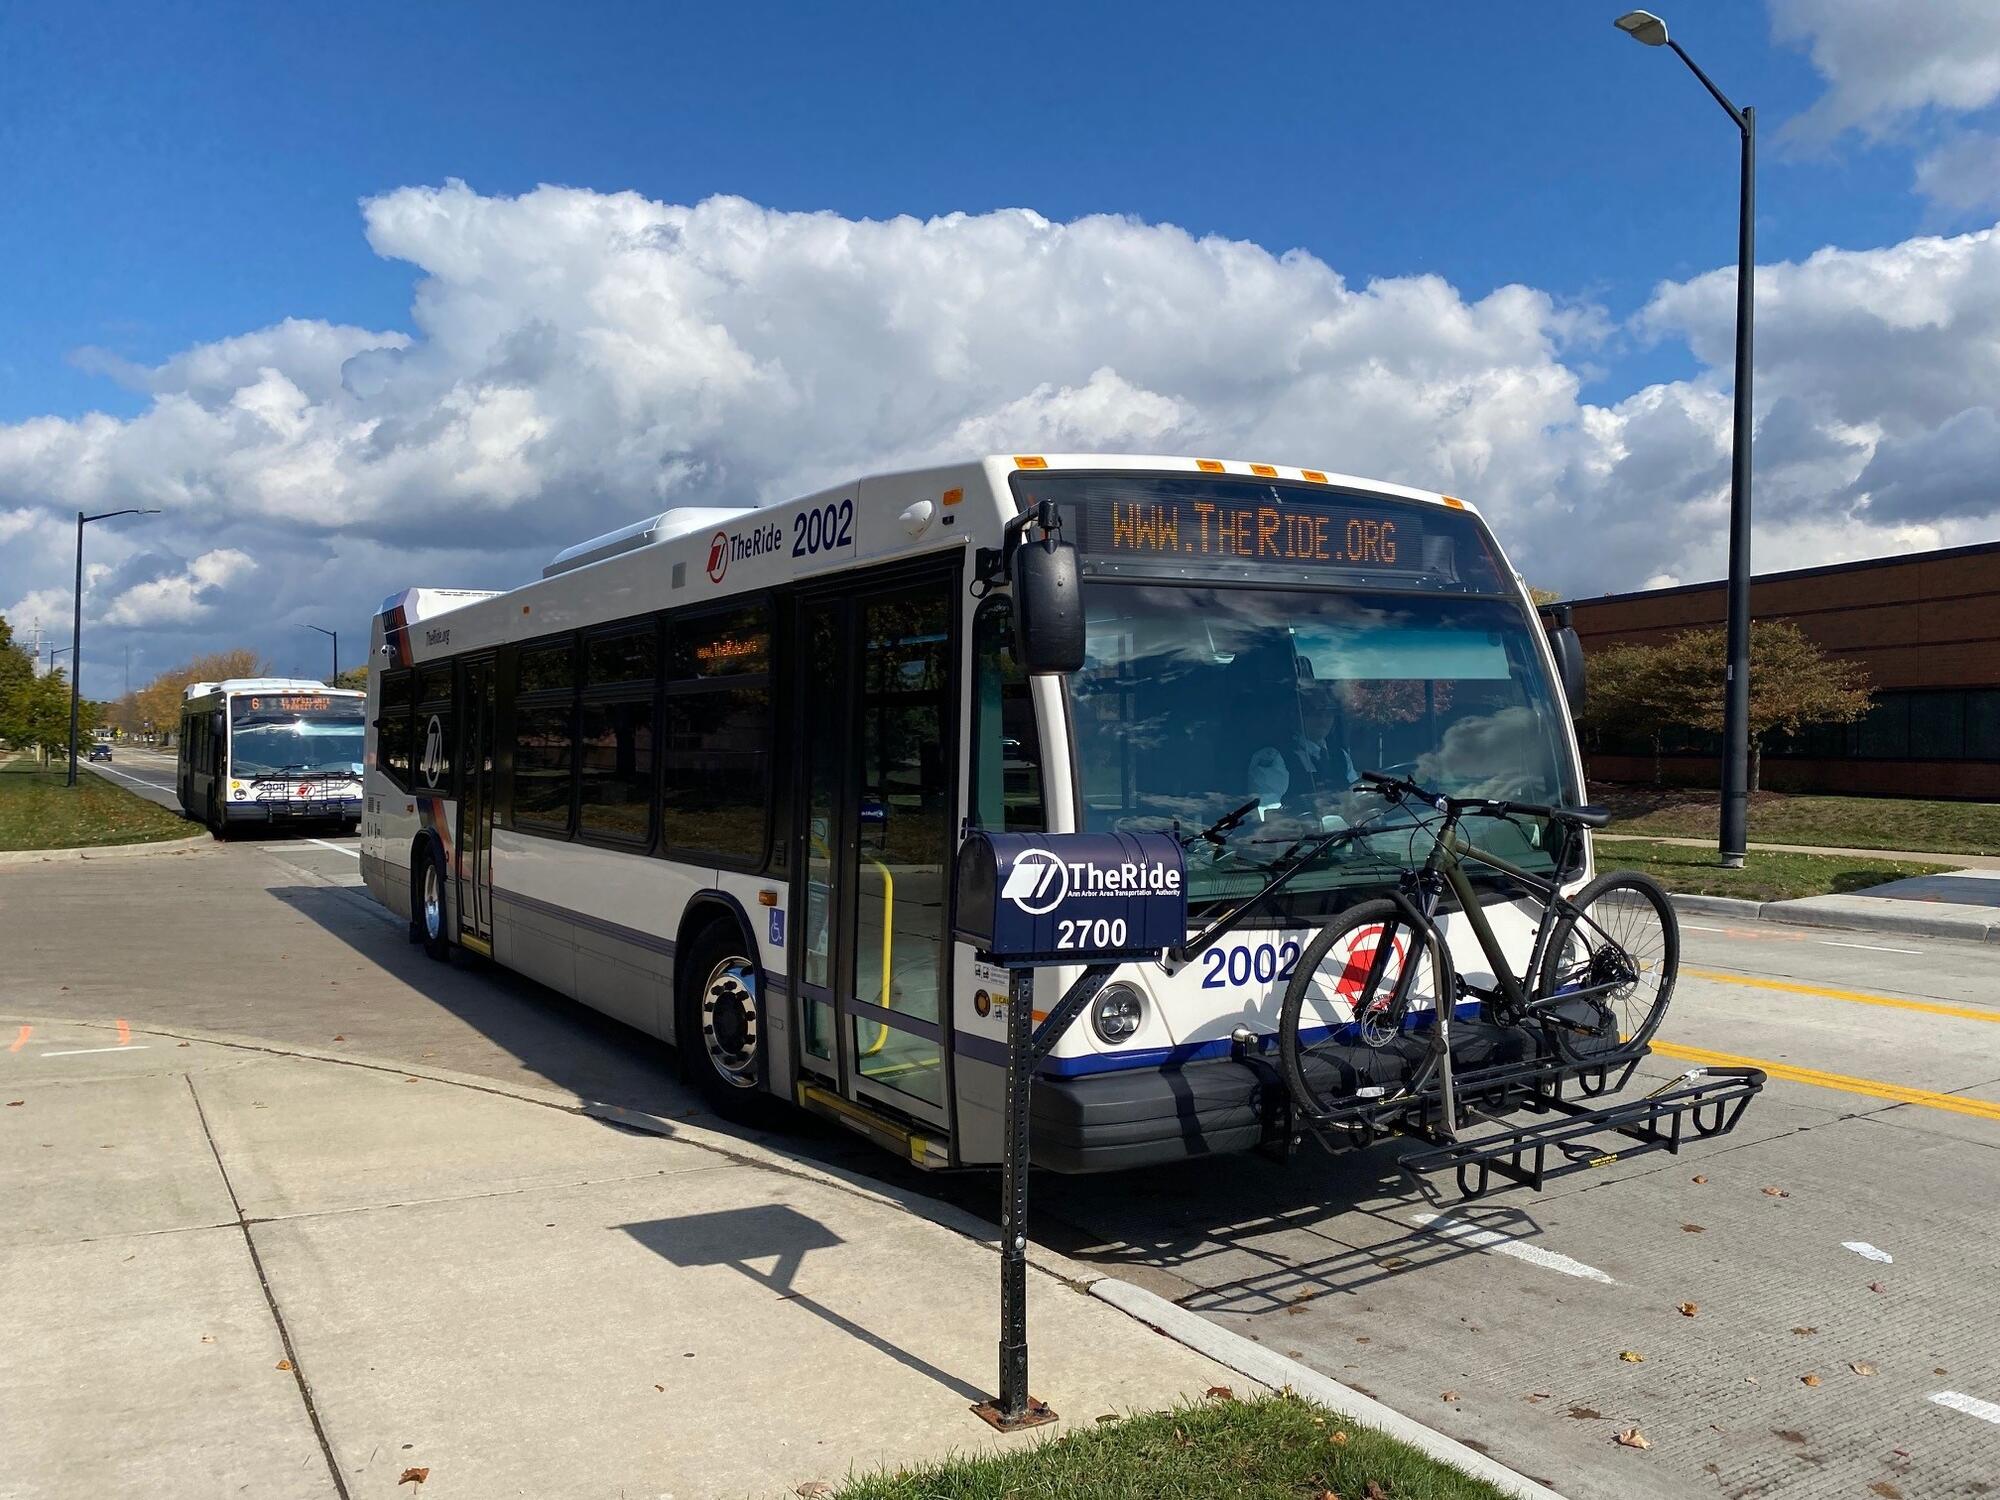 Bus with bike on front